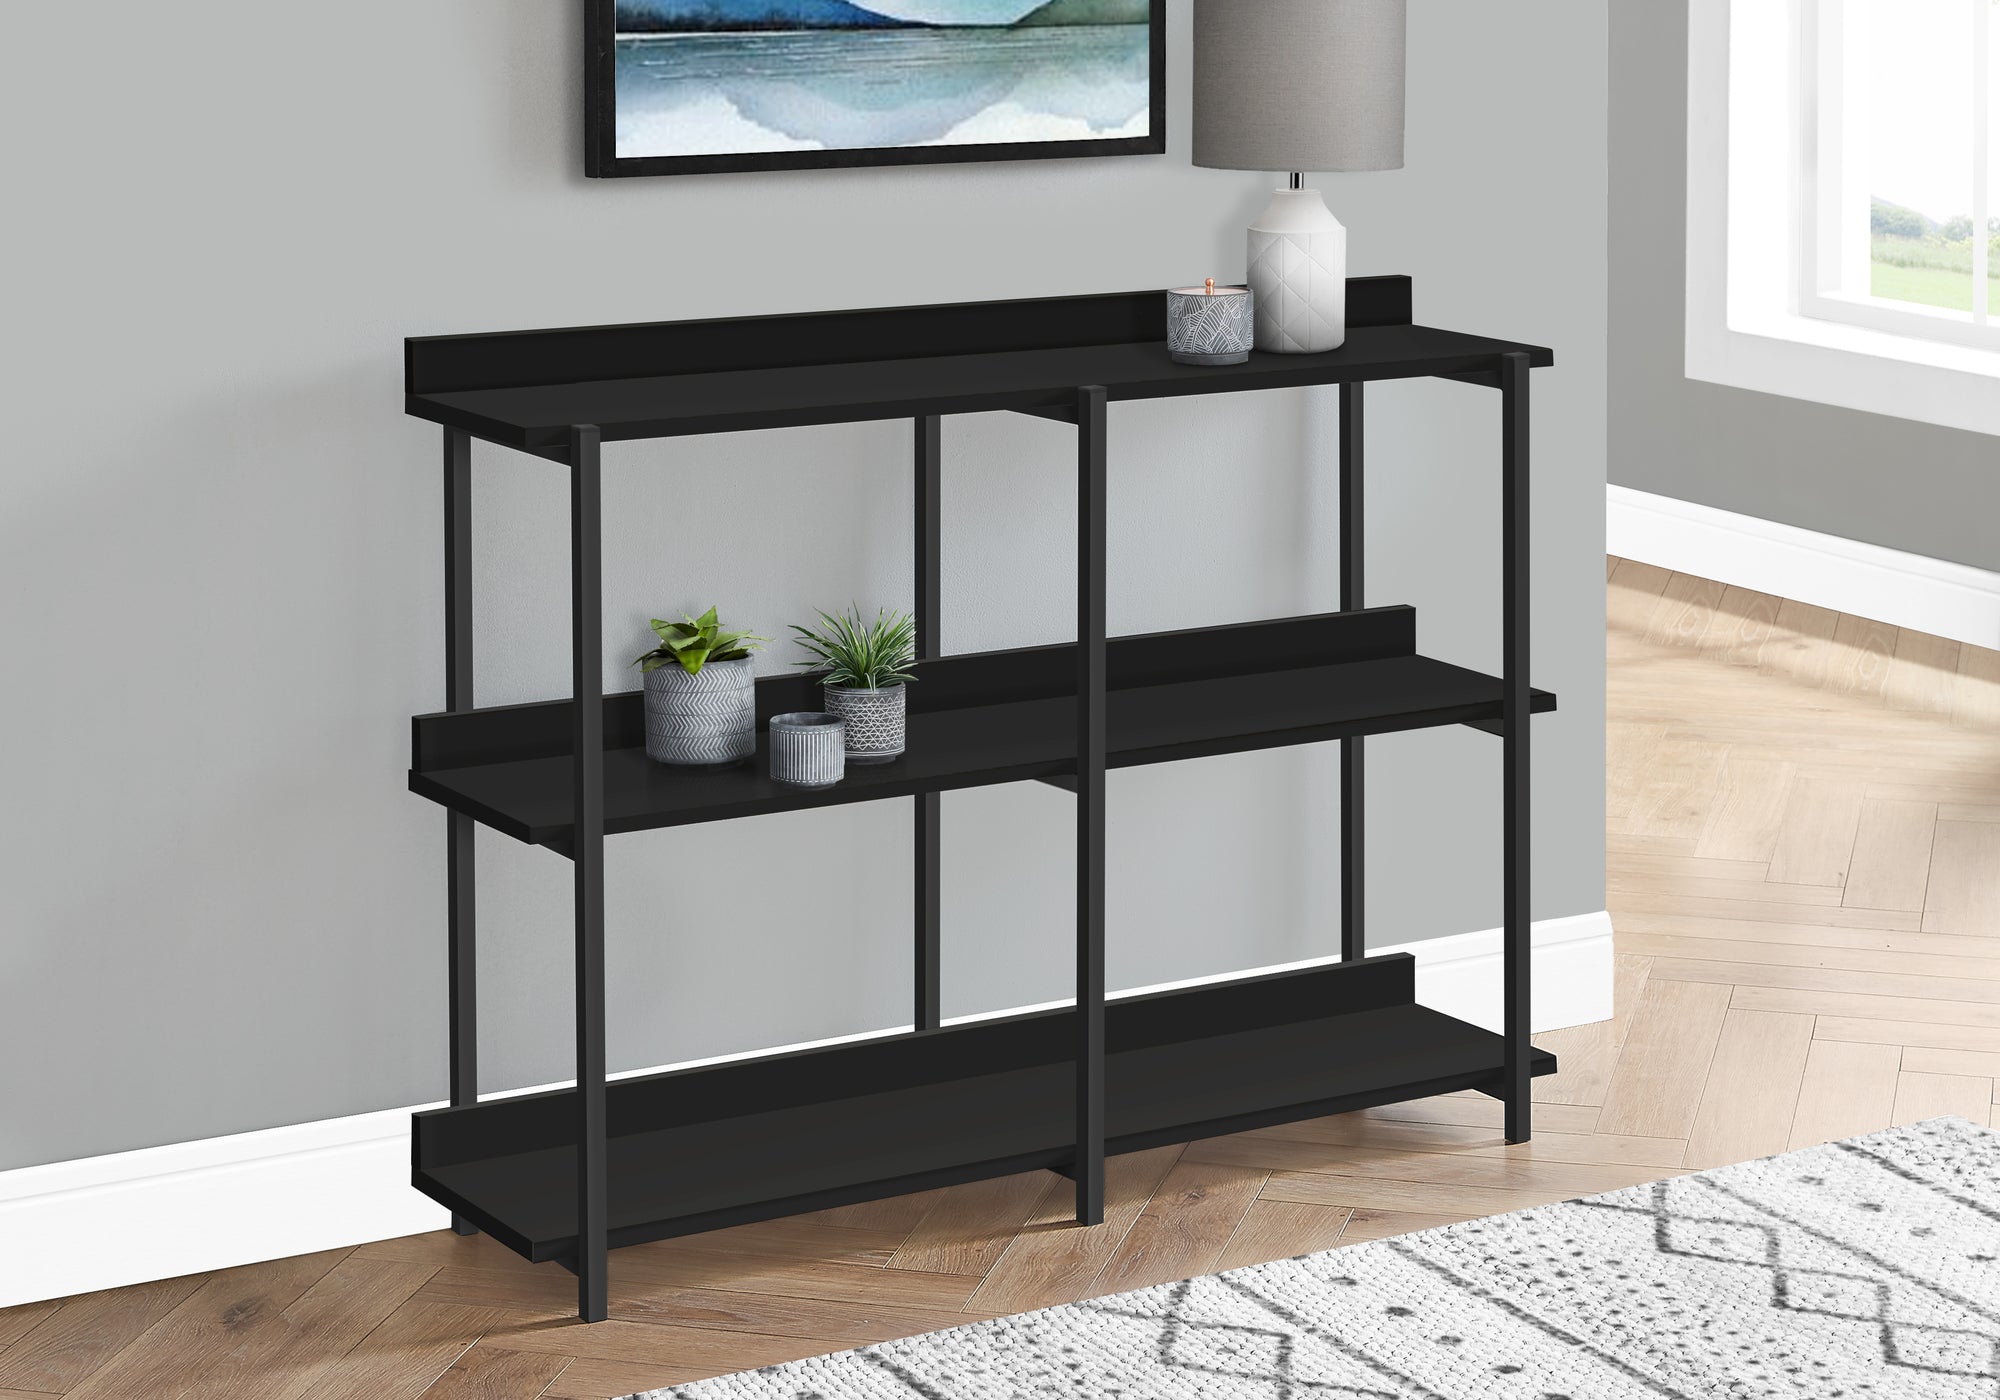 MN-572219    Accent Table, Console, Entryway, Narrow, Sofa, Living Room, Bedroom, Metal Legs, Laminate, Black, Contemporary, Modern